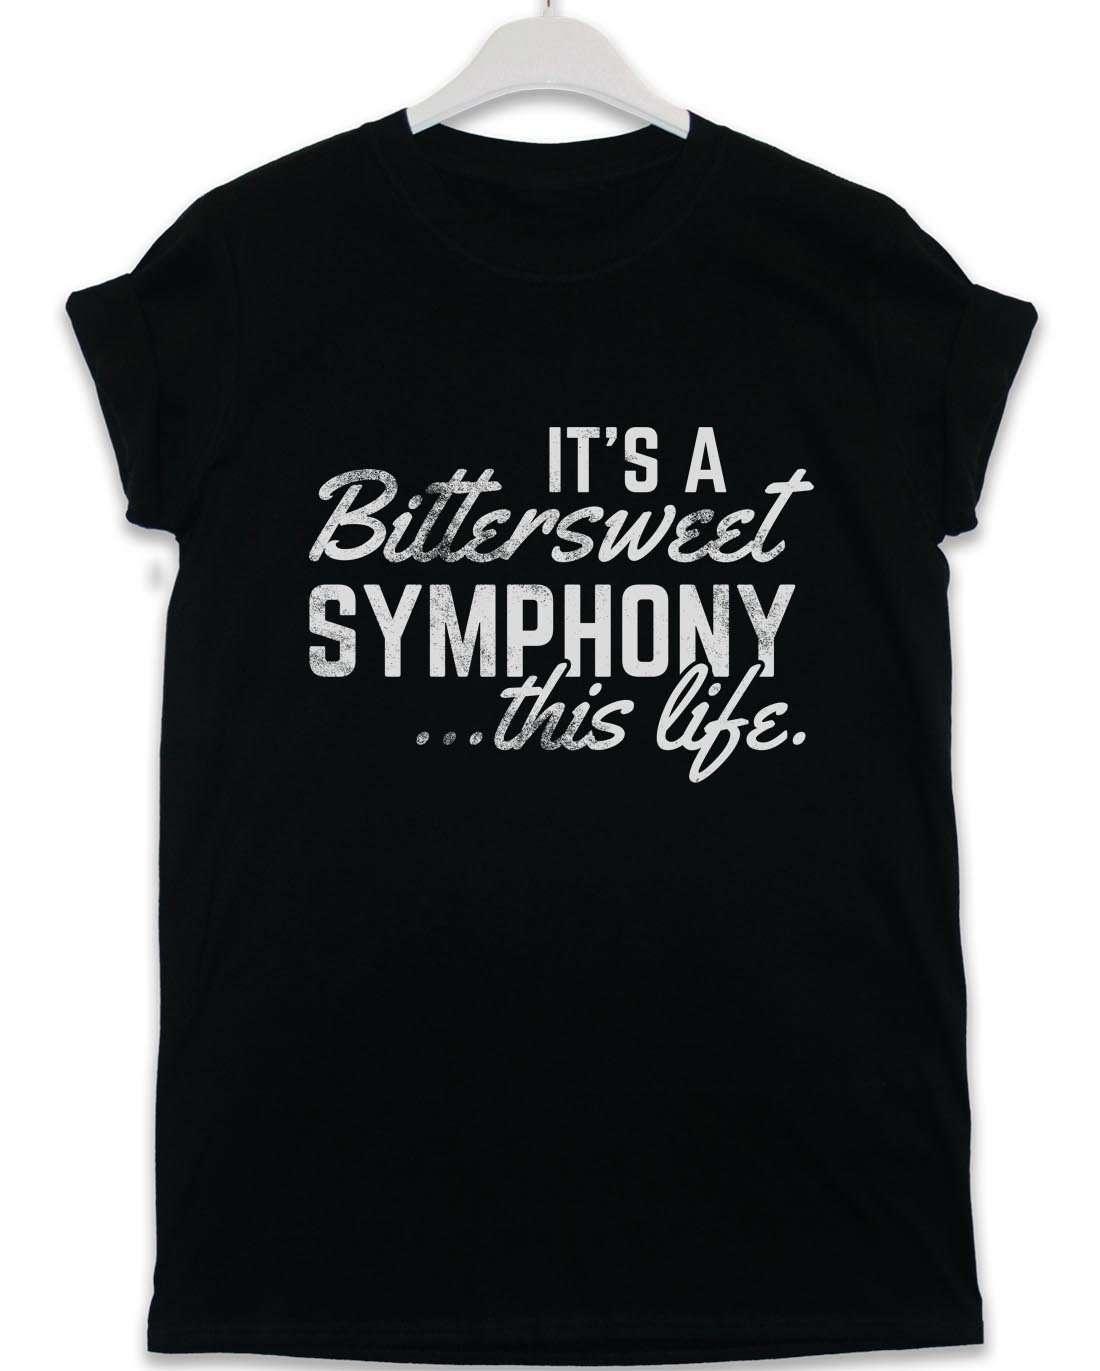 Bittersweet Symphony This Life Lyric Quote T-Shirt For Men 8Ball